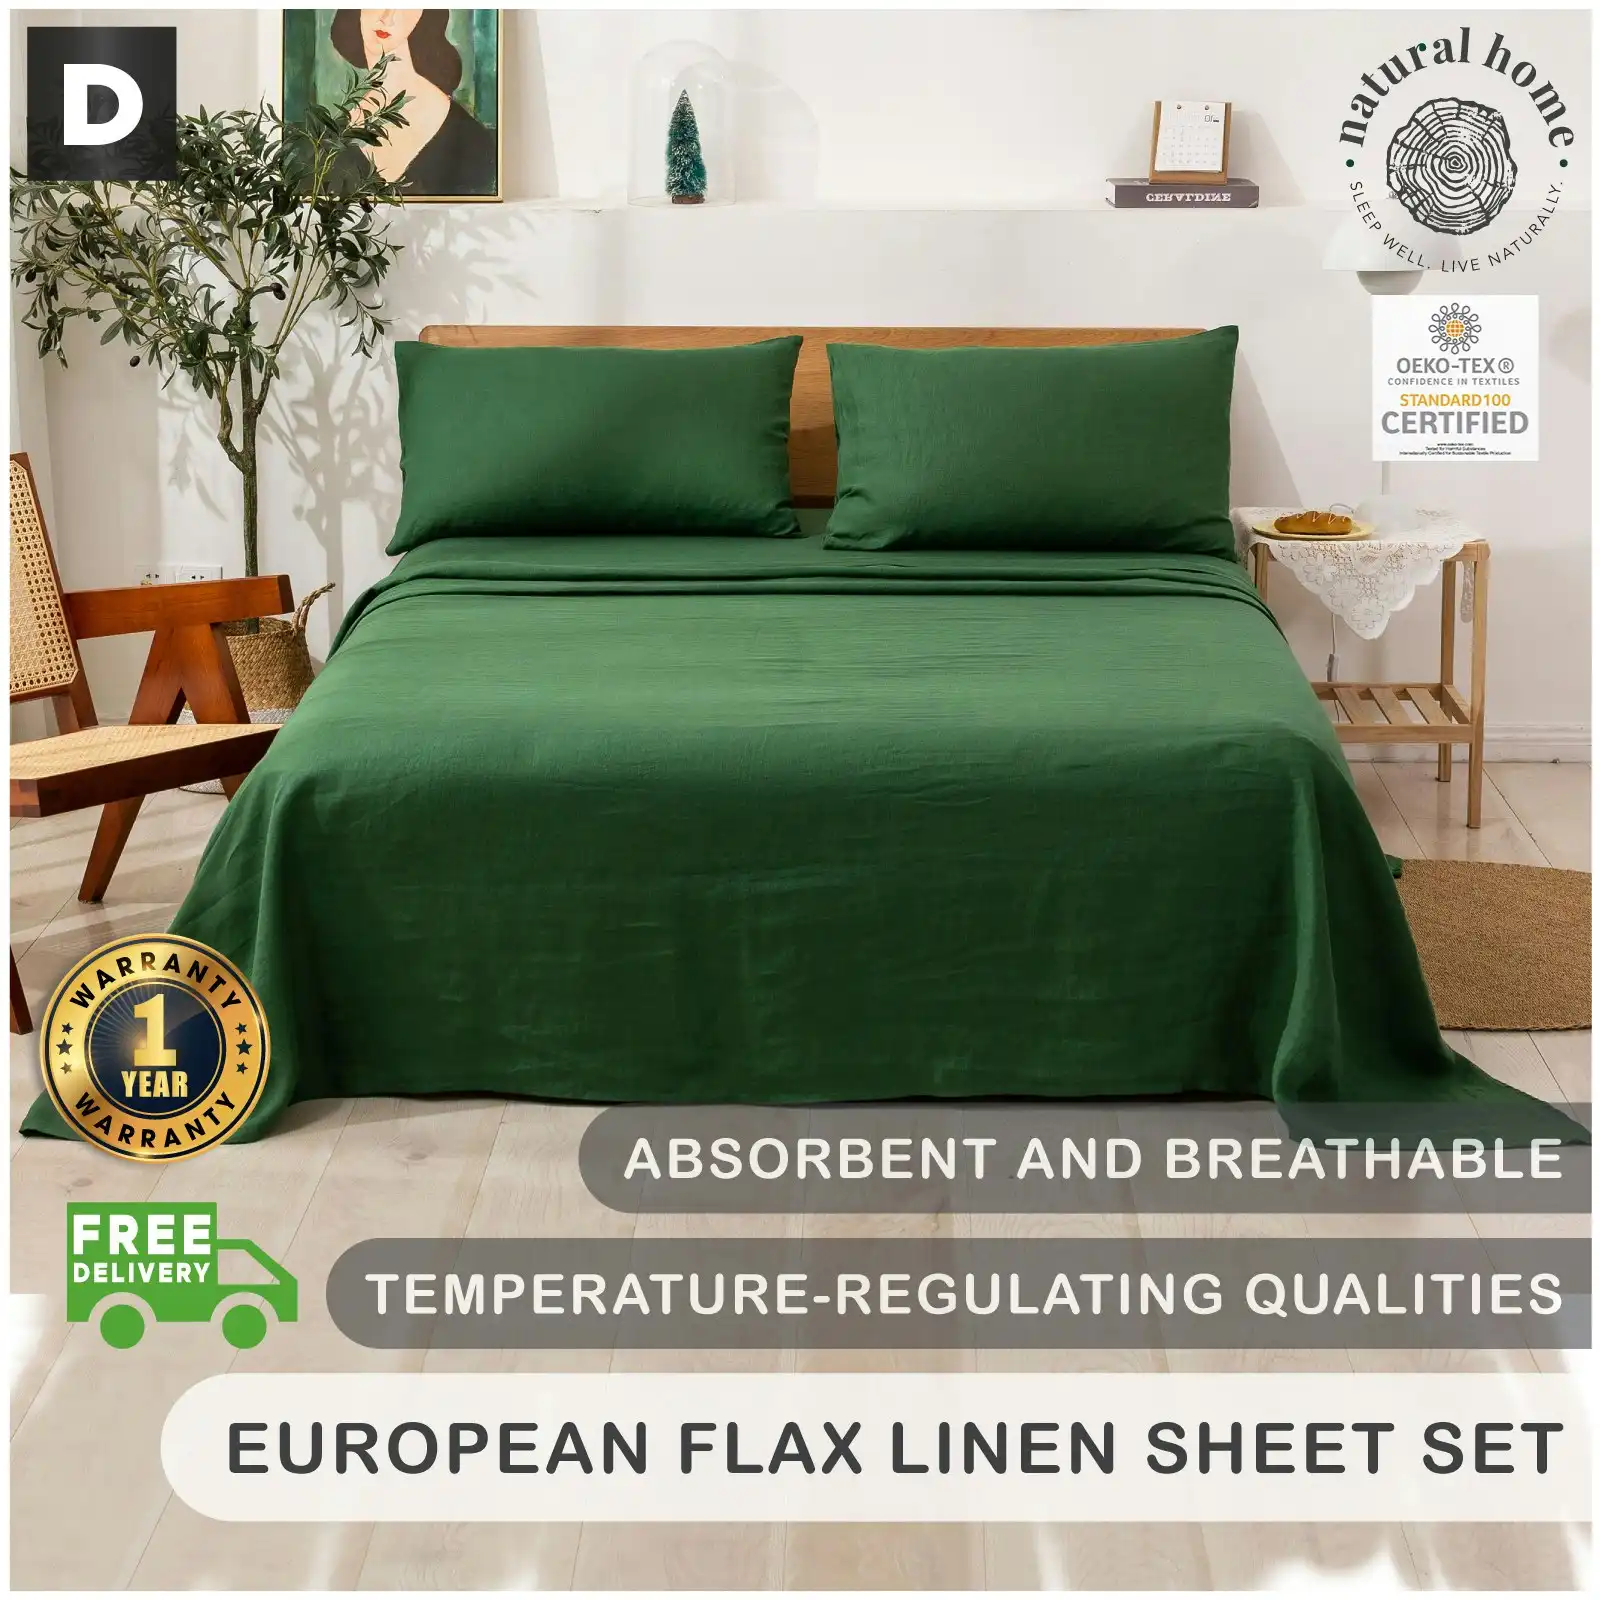 Natural Home 100% European Flax Linen Sheet Set - Olive - Double Bed